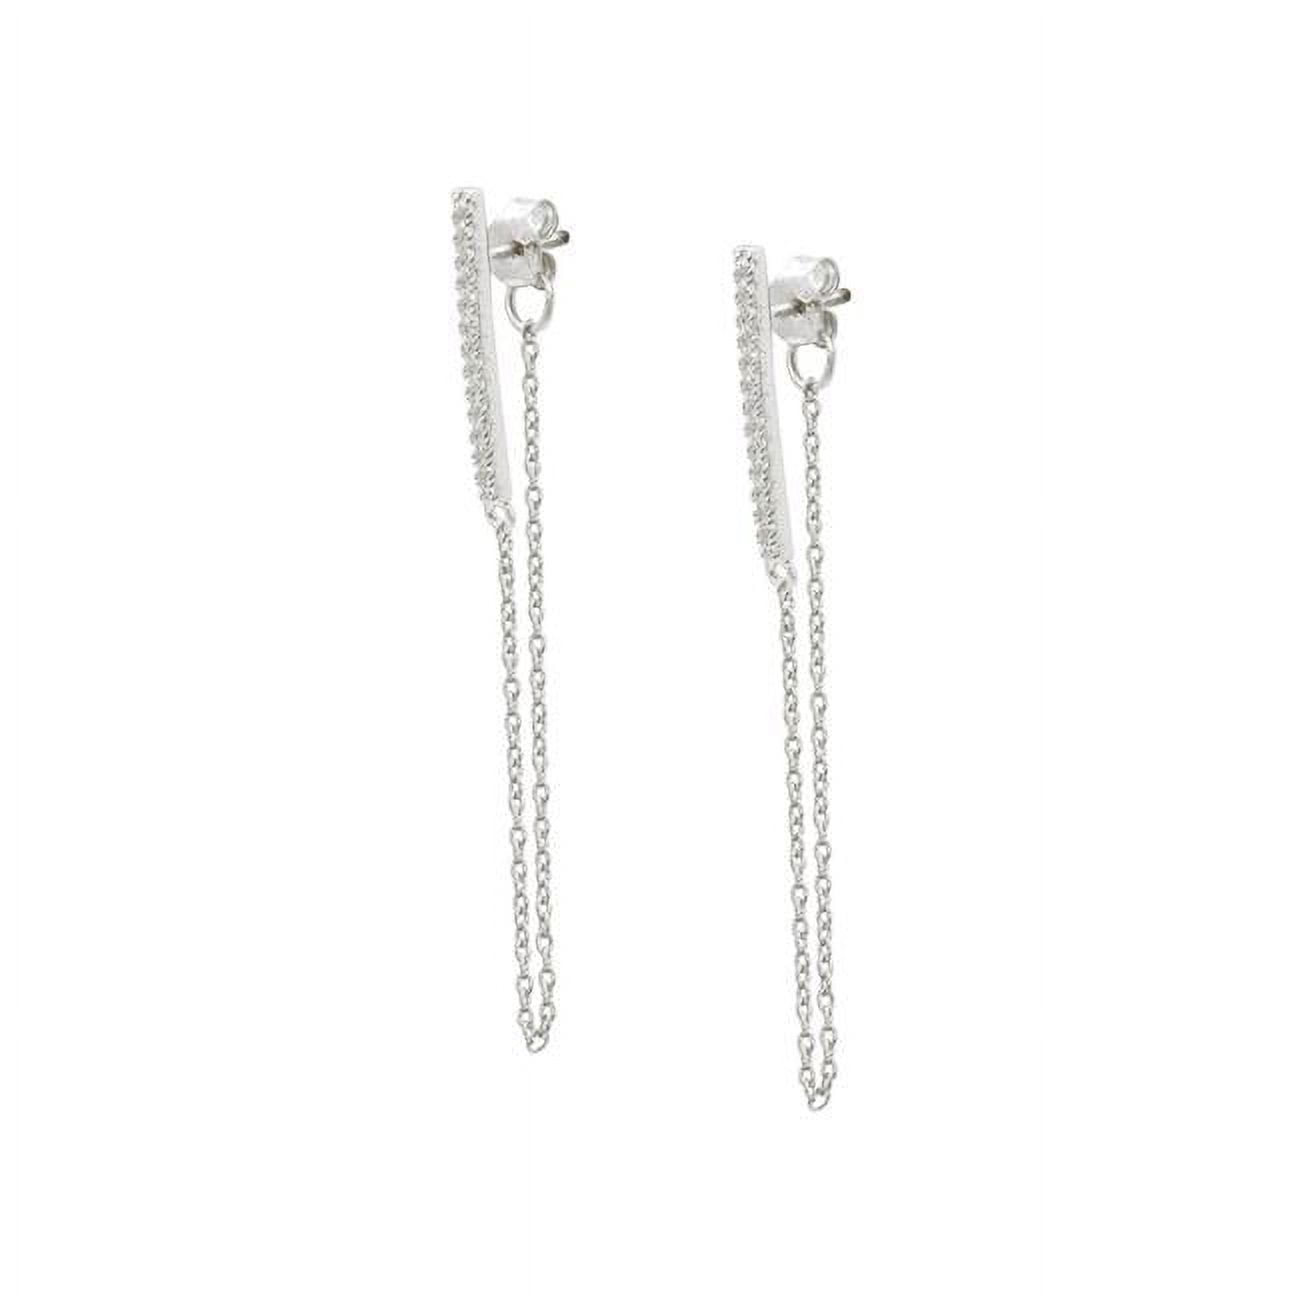 Je5128 1.75 In. Sterling Silver Bar & Chain Studs